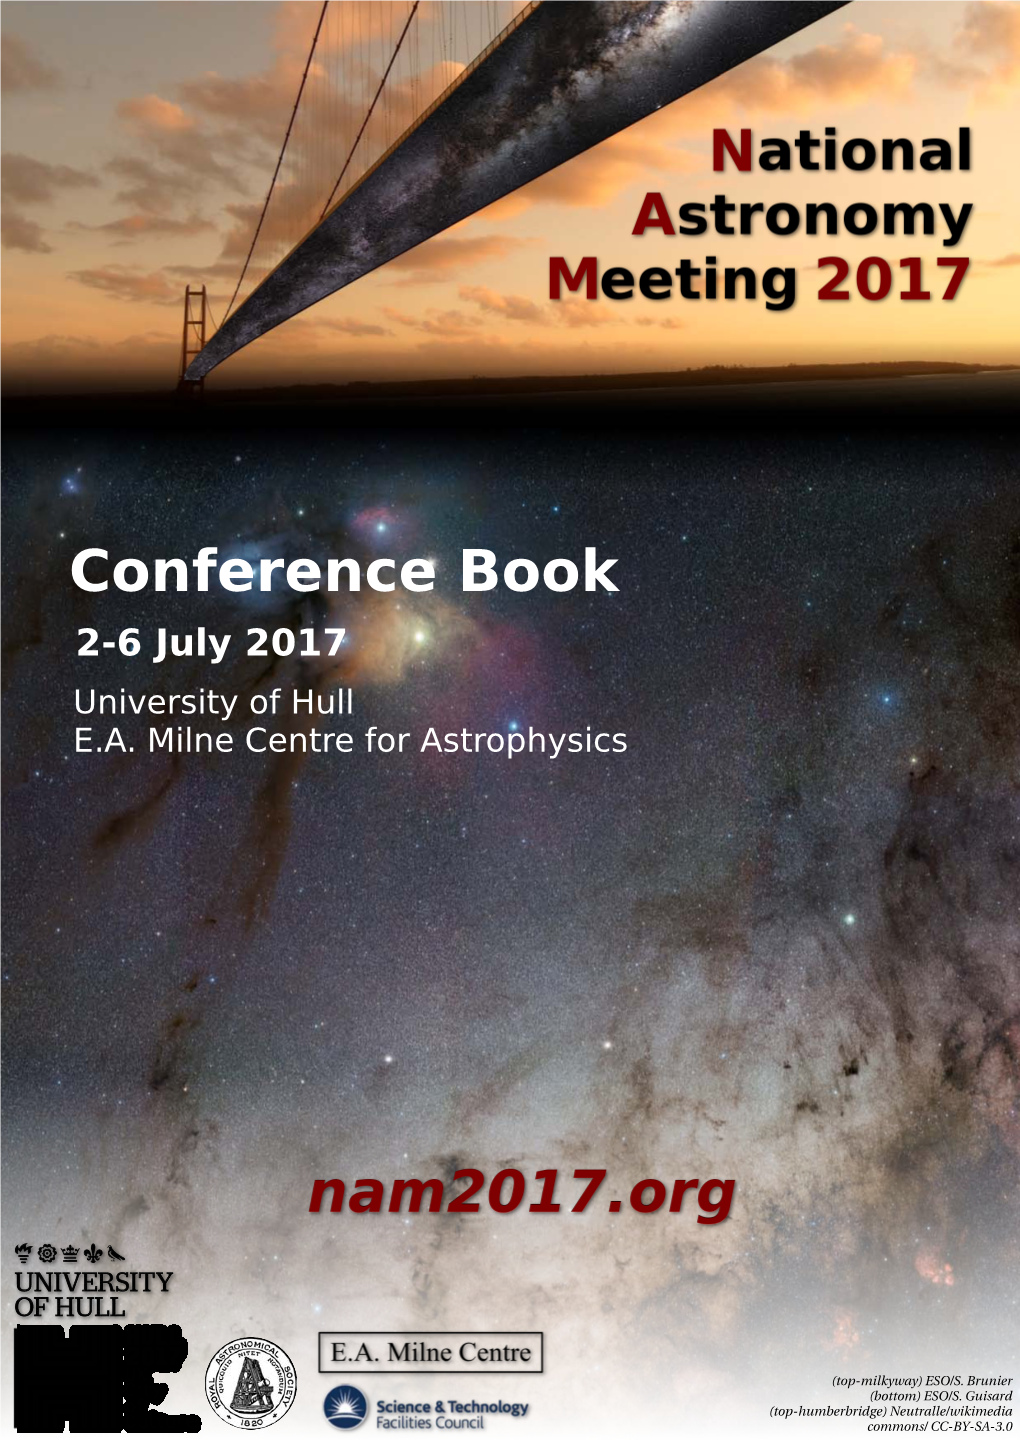 Conference Book 2-6 July 2017 University of Hull E.A